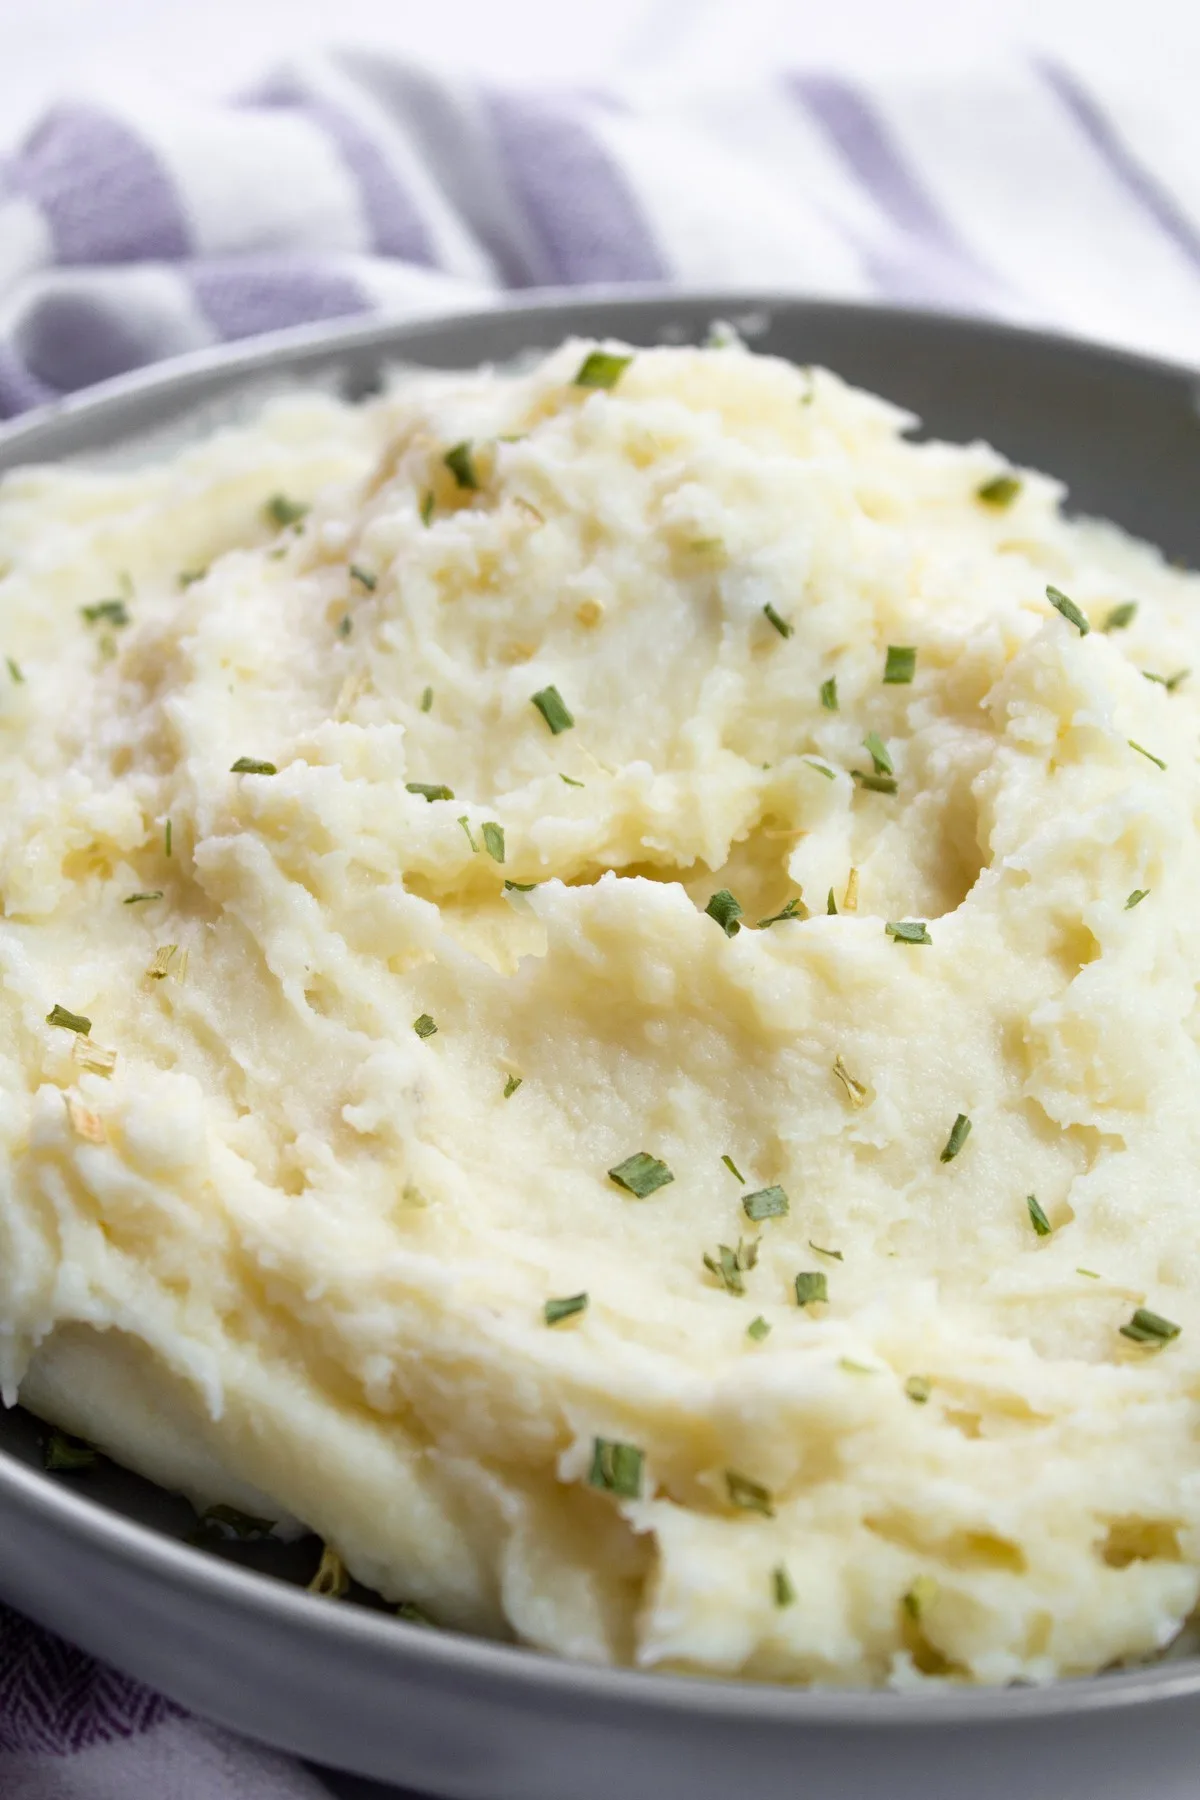 mashed potatoes with chives